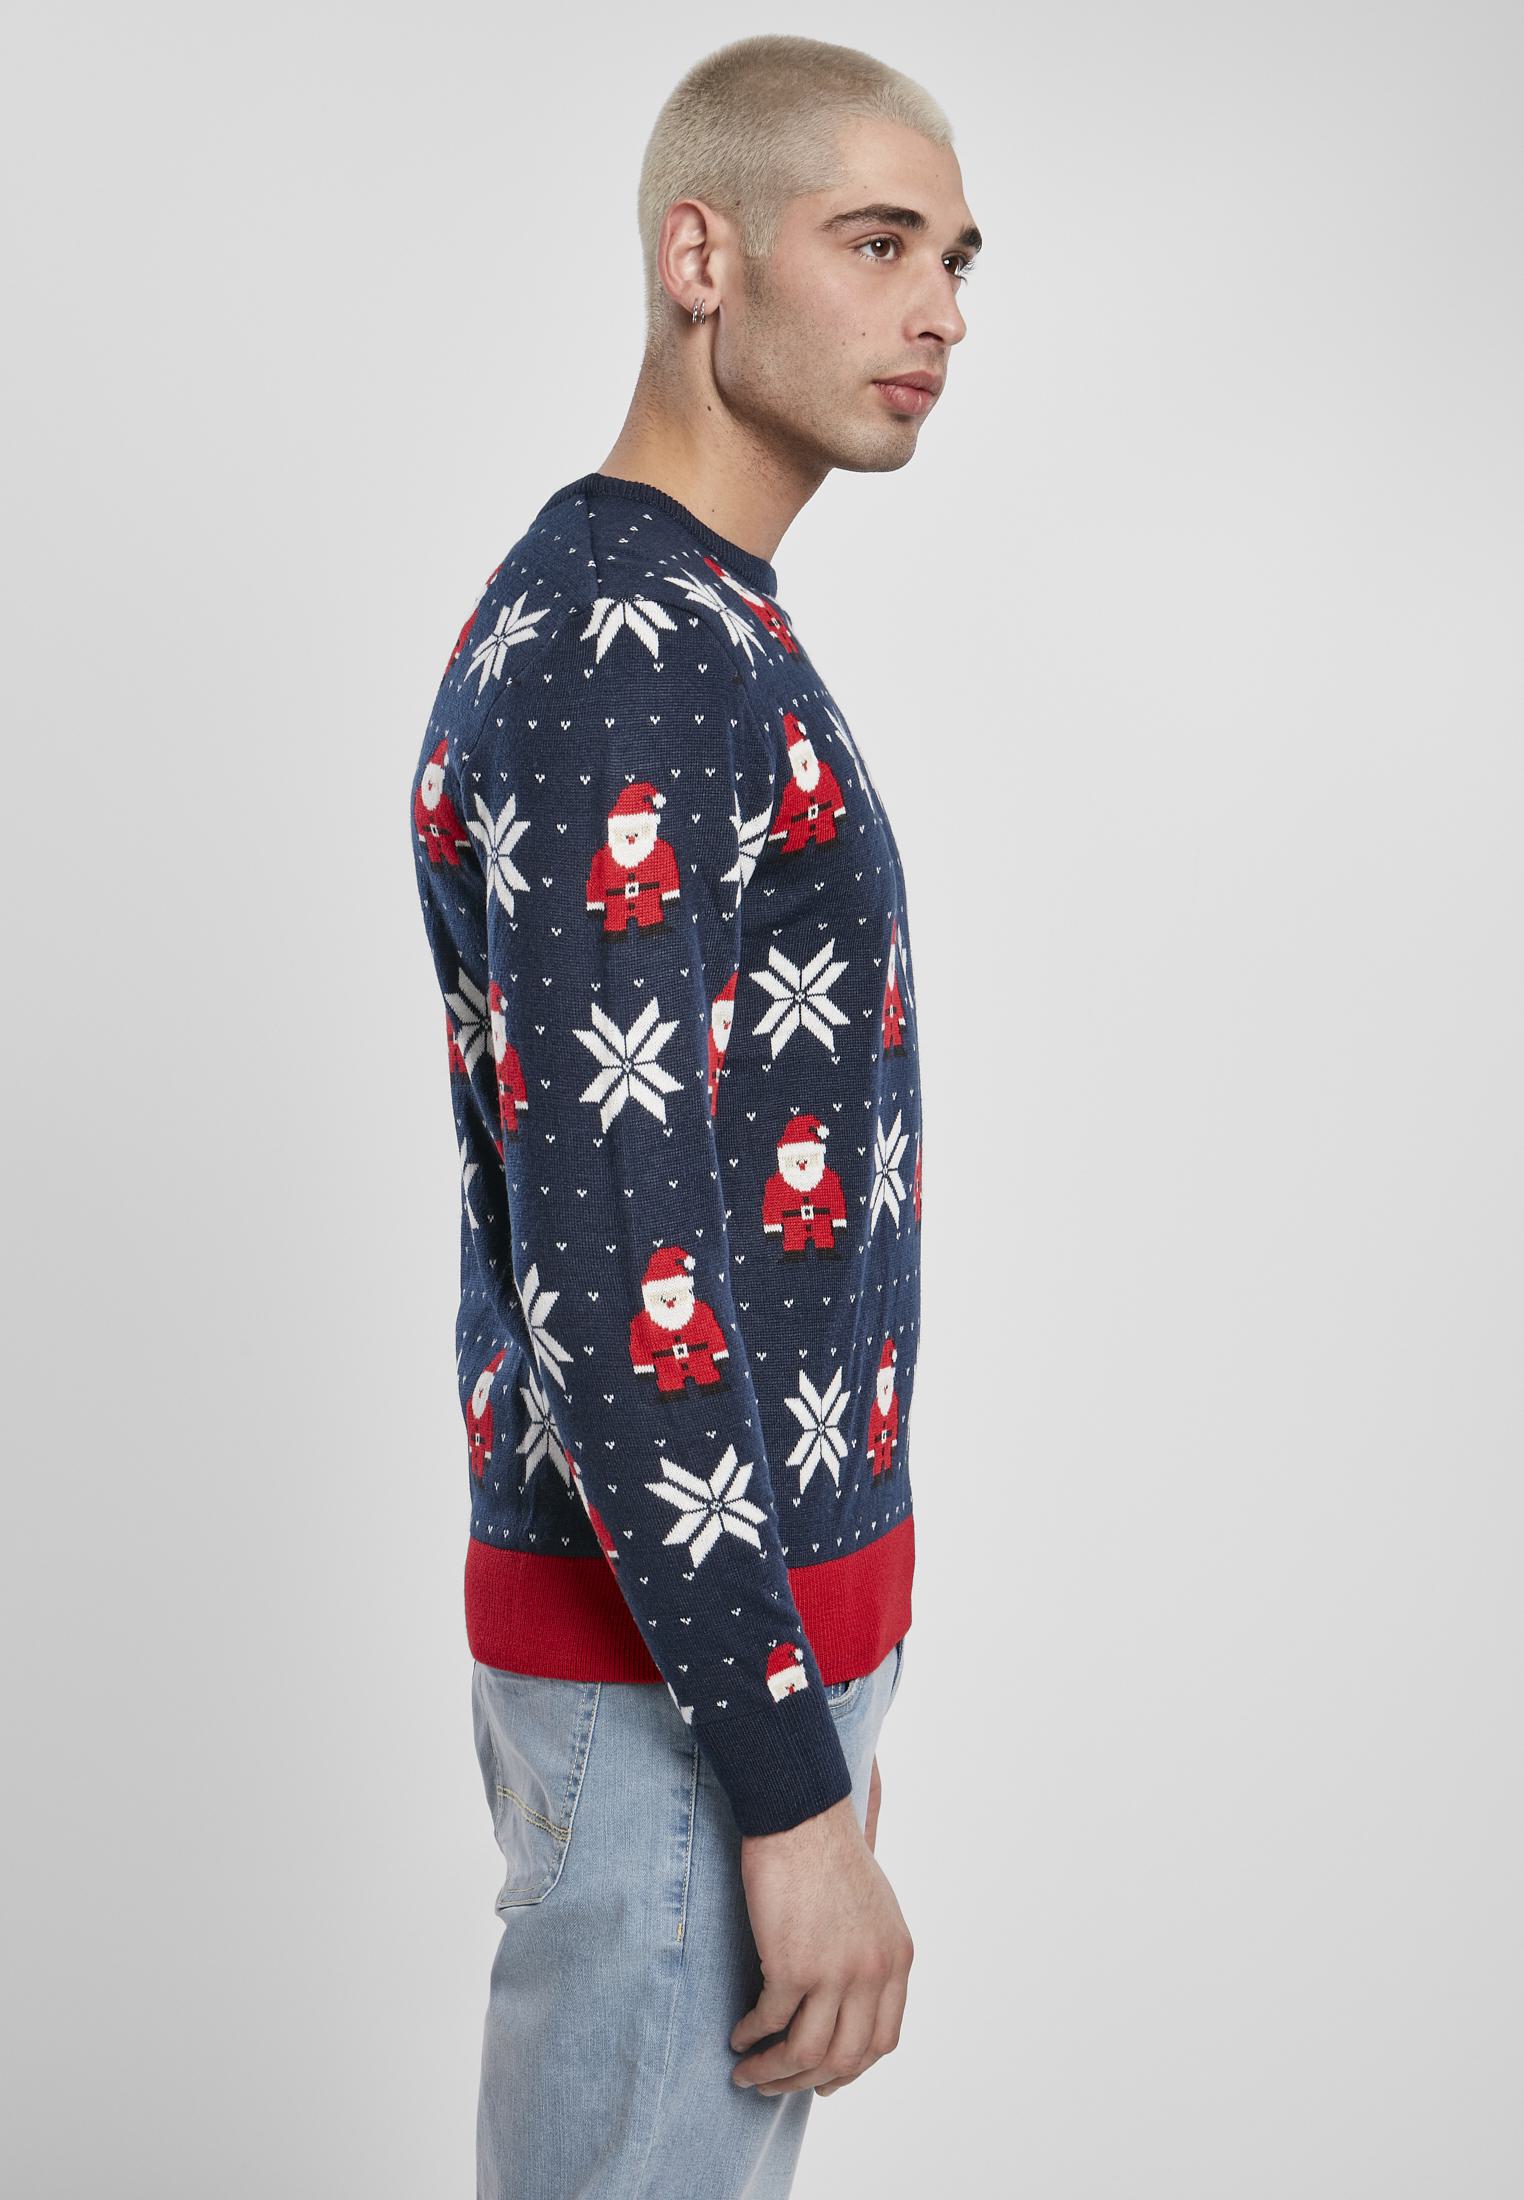 UC Men Nicolaus And Snowflakes Sweater (Farbe: nicolaus and snowflake aop / Größe: M)